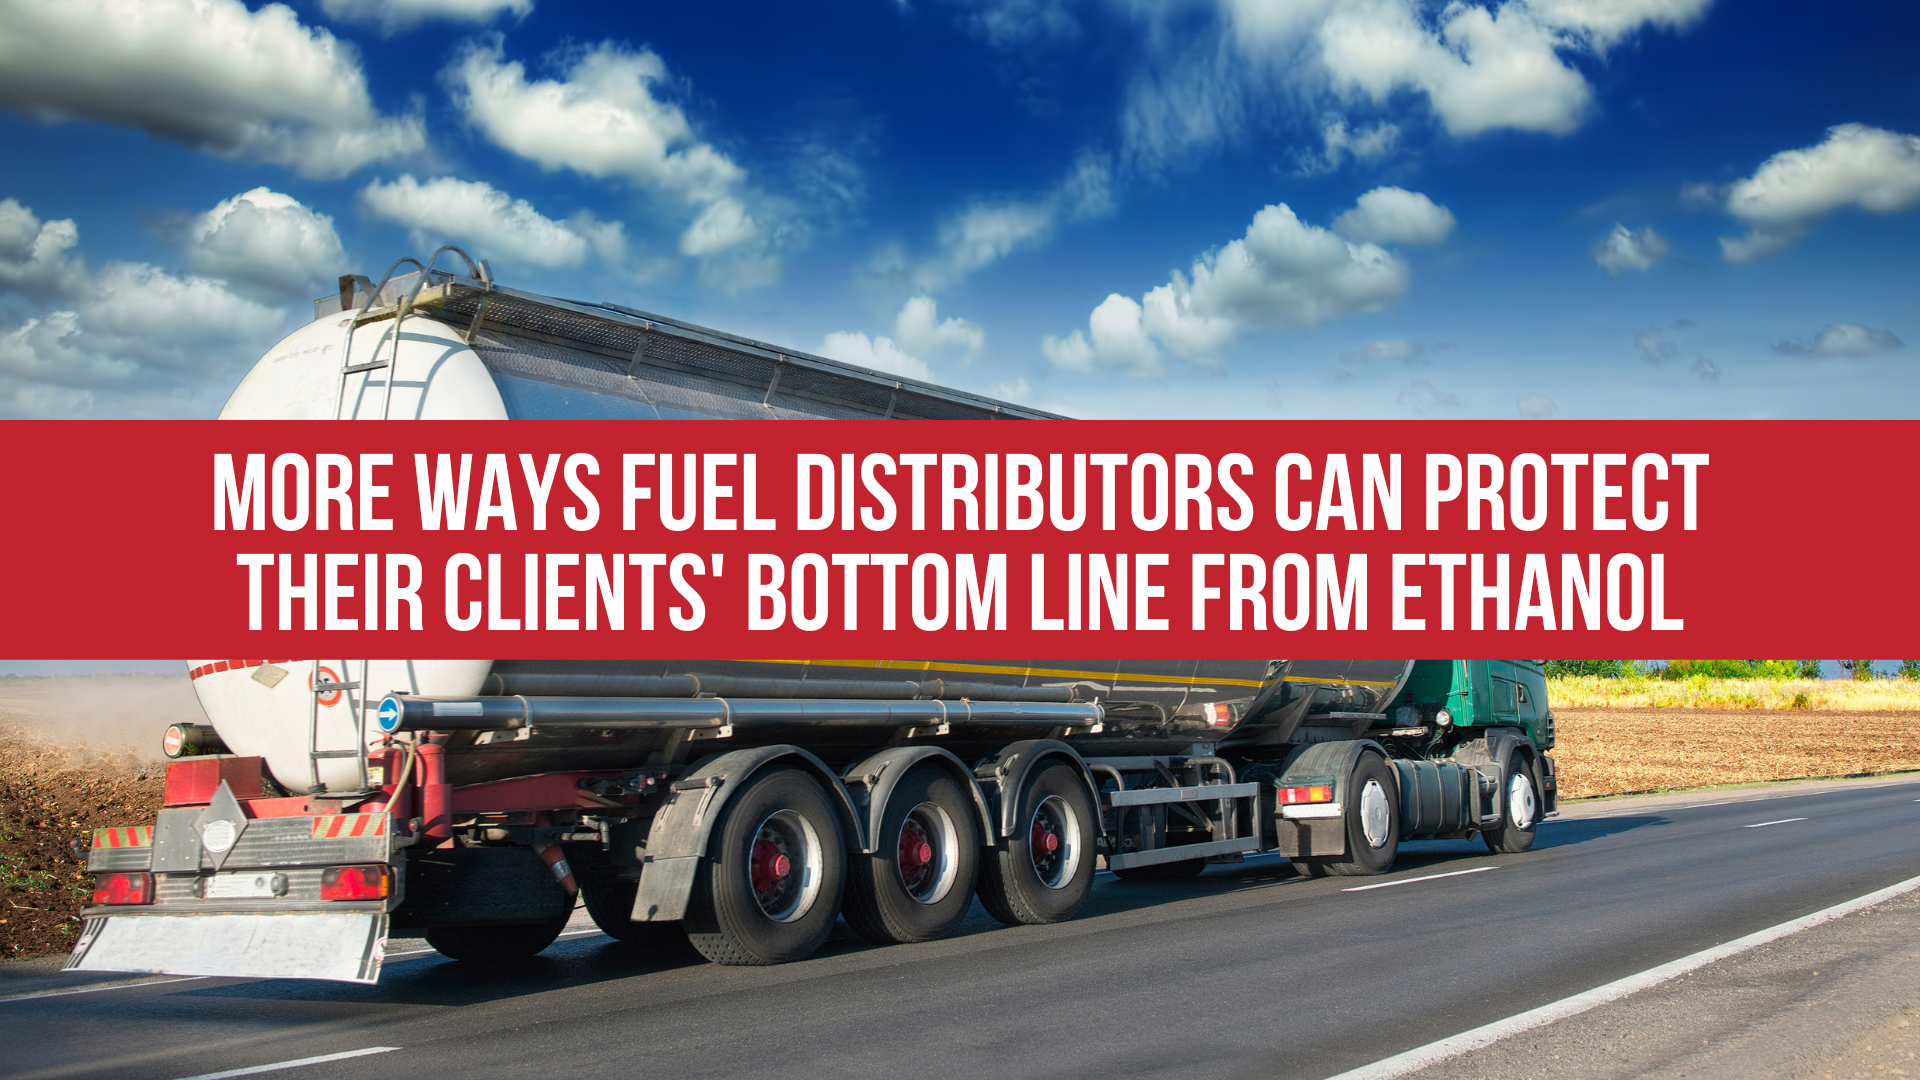 More Ways Fuel Distributors Can Protect Their Clients' Bottom Line From Ethanol